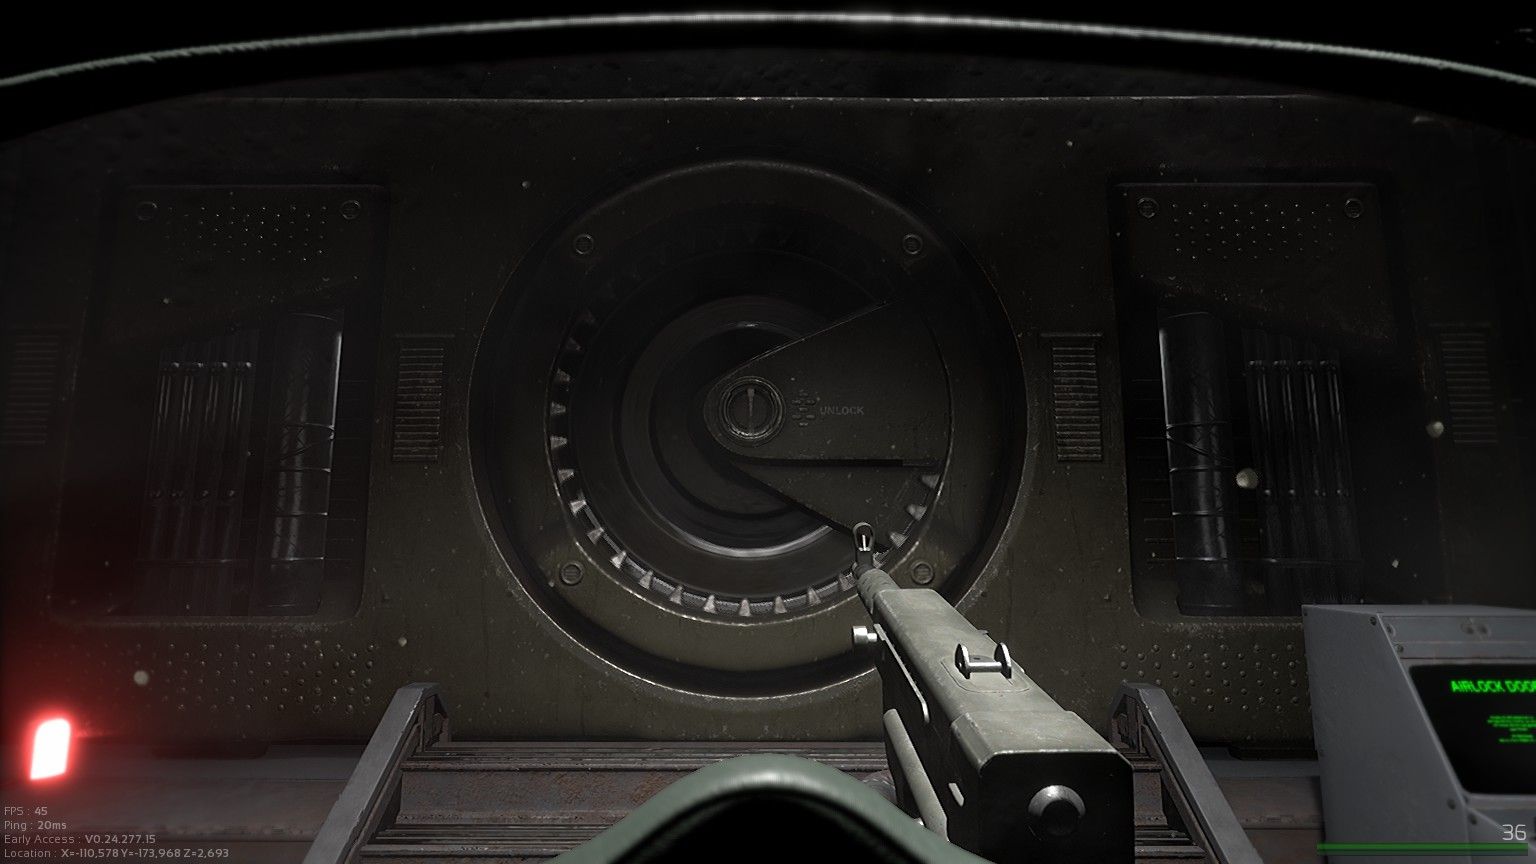 Screenshot of the game. A first-person perspective holding a gun, facing a round spaceship door.